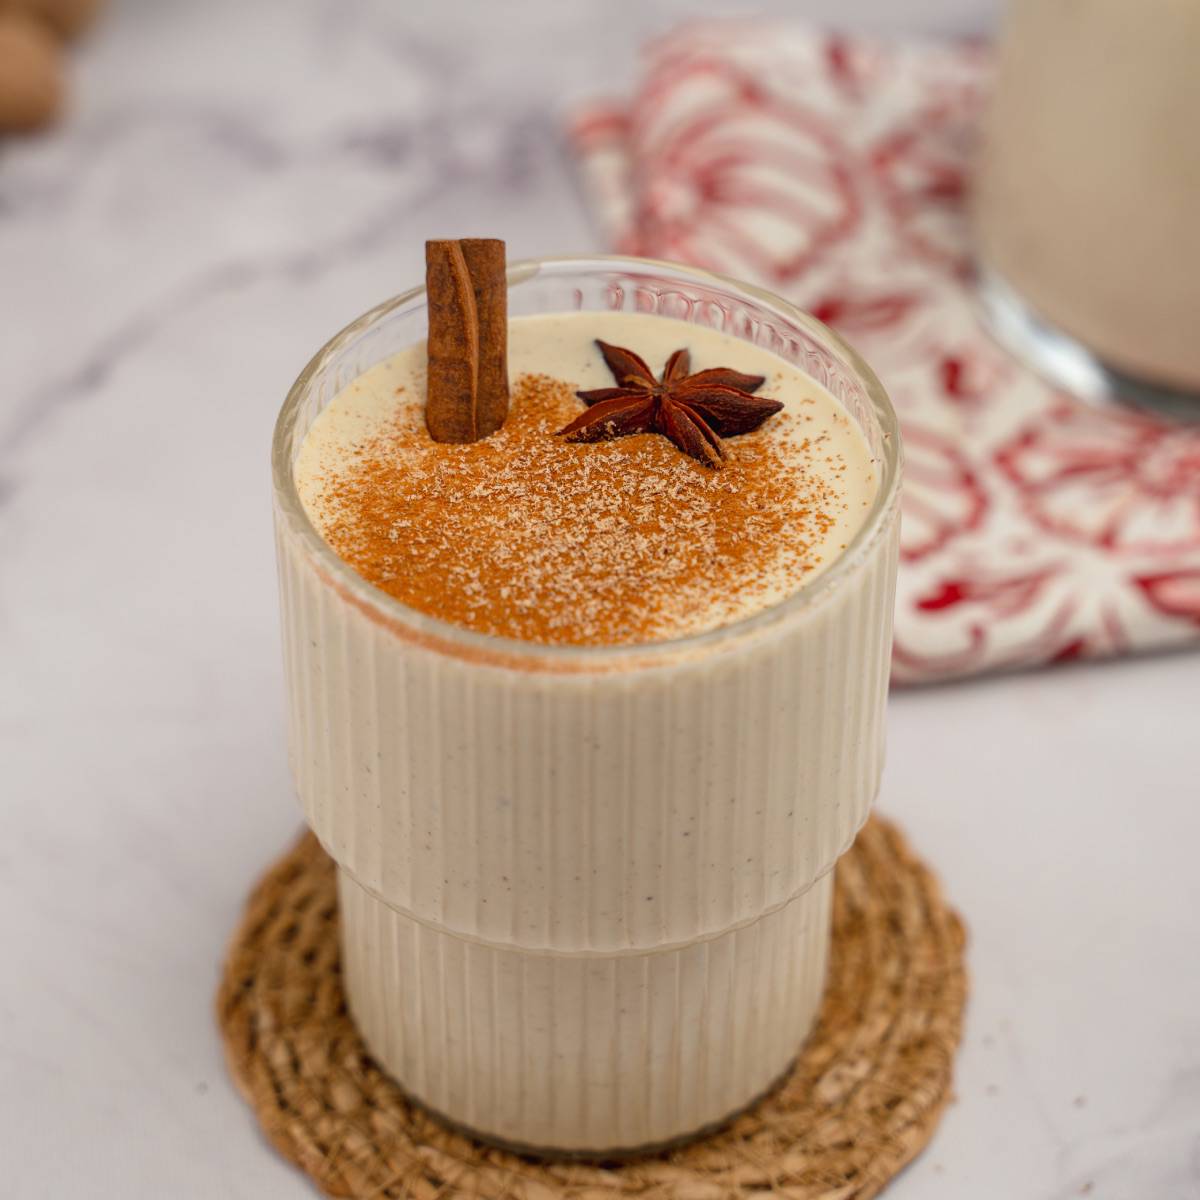 A transparent glass holding keto eggnog, garnished with cinnamon sticks, star anise, and cinnamon and nutmeg powder.